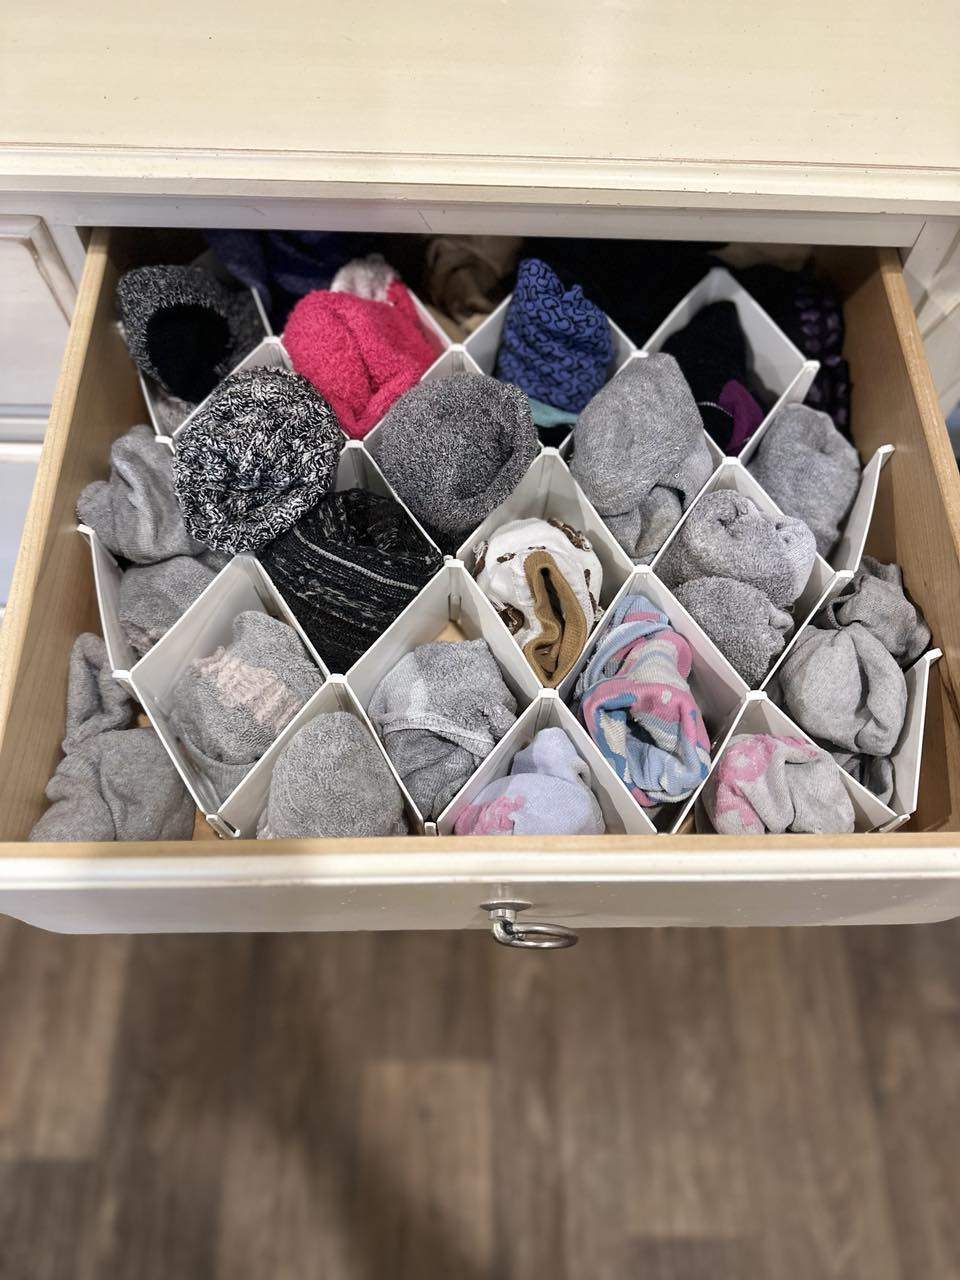 how to organize socks and underwear